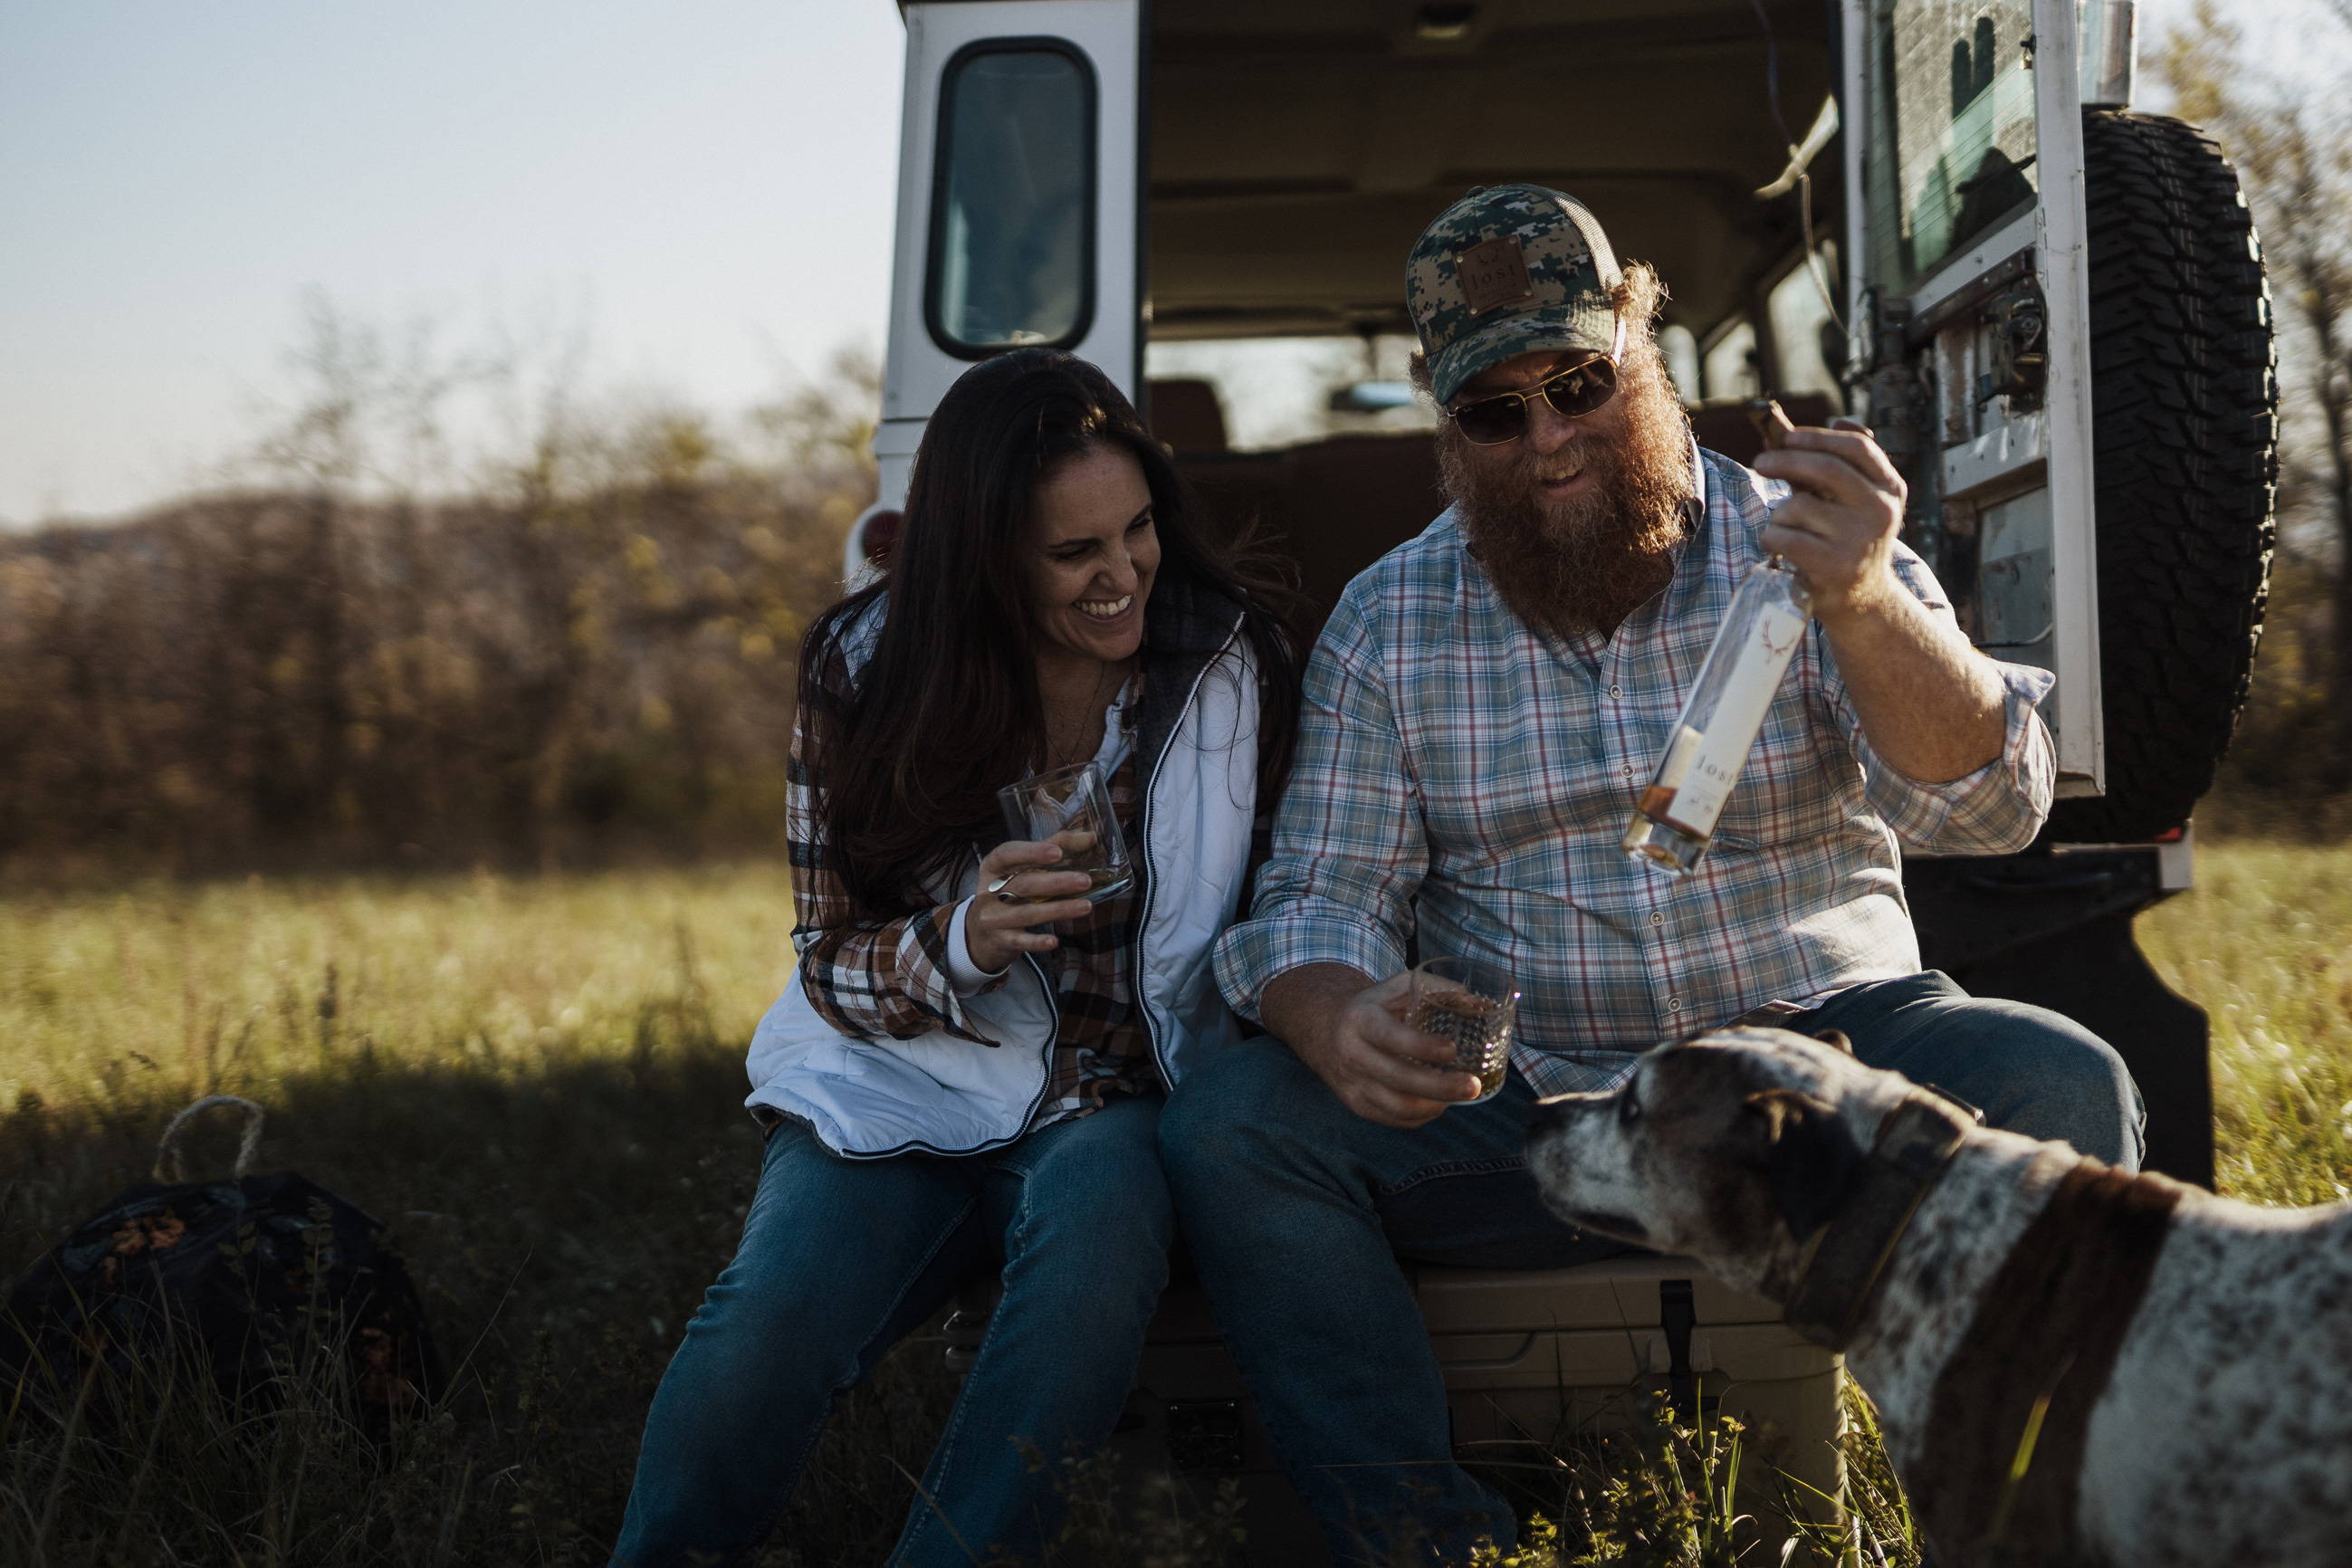 A couple (man and woman) sitting on the bumper of a vintage vehicle looking at a bottle of Lost Whiskey.